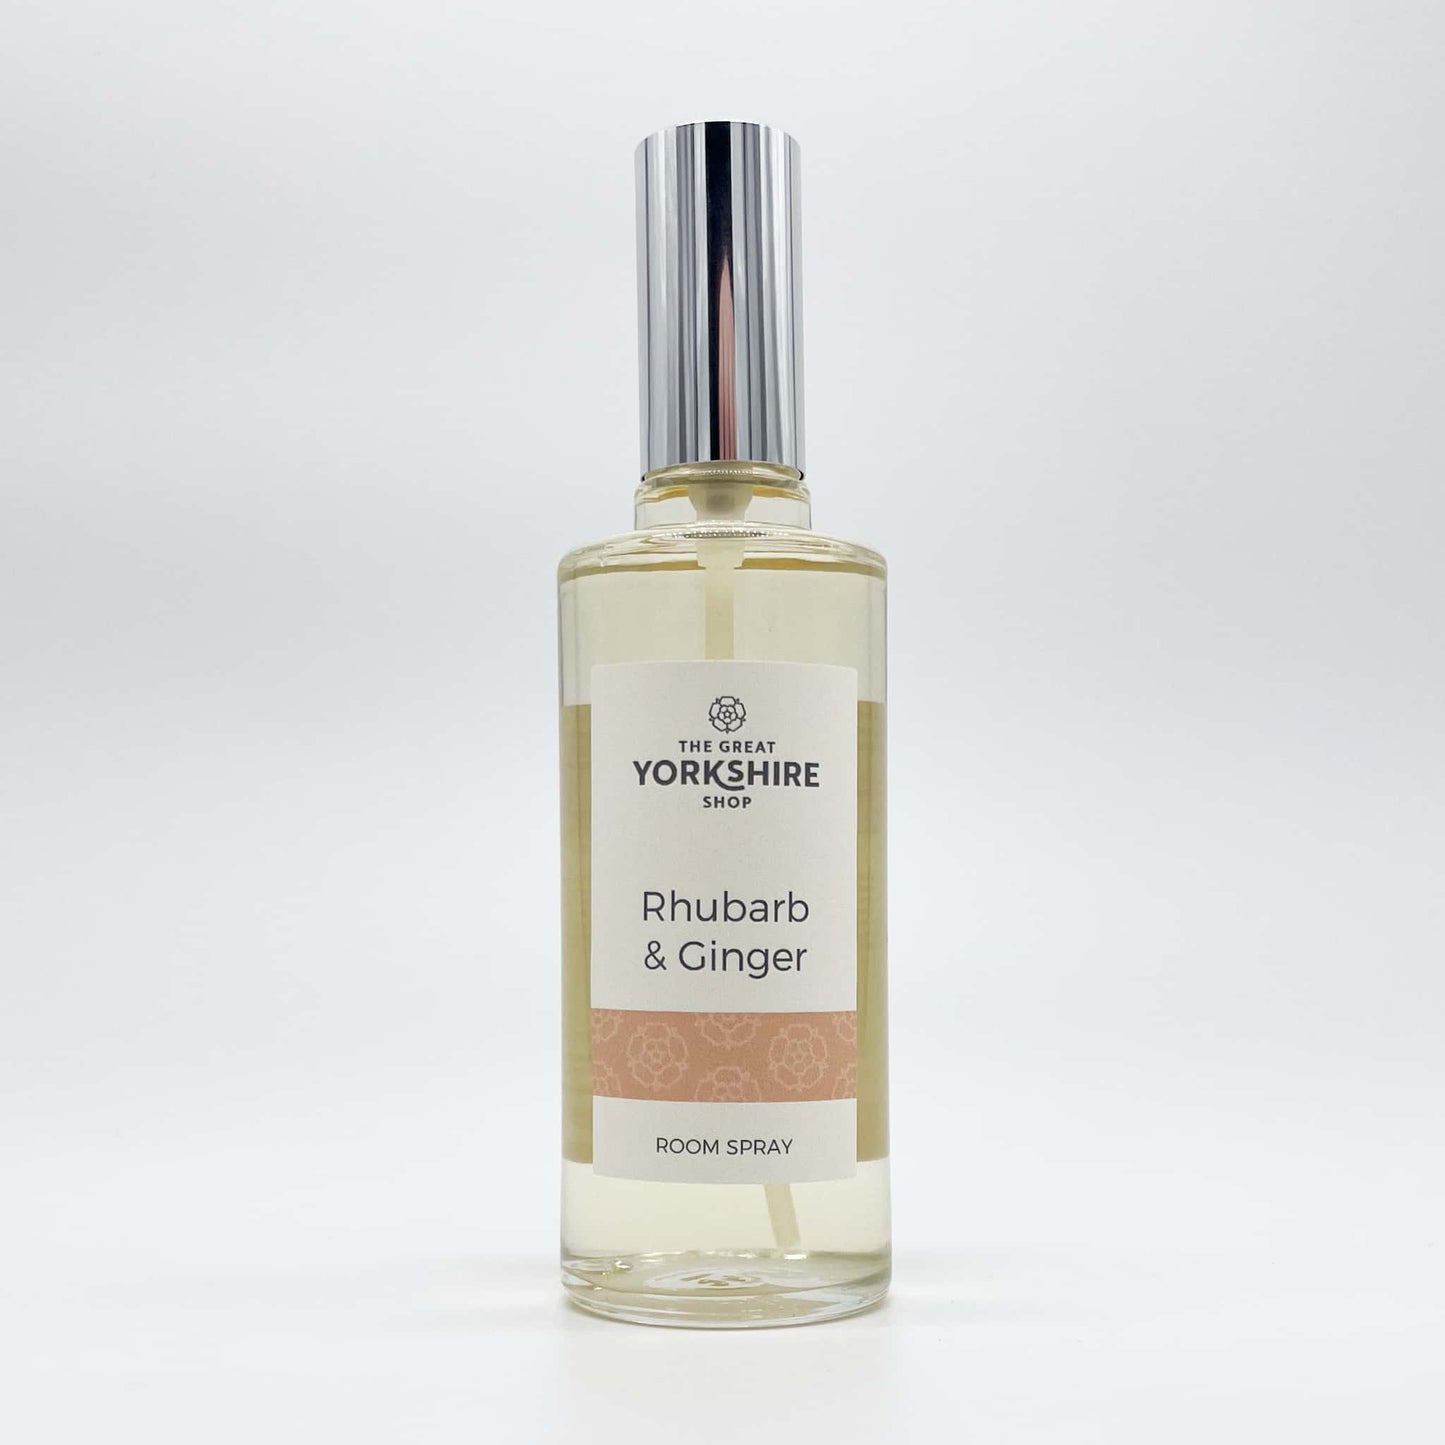 Rhubarb & Ginger Room Spray - The Great Yorkshire Shop